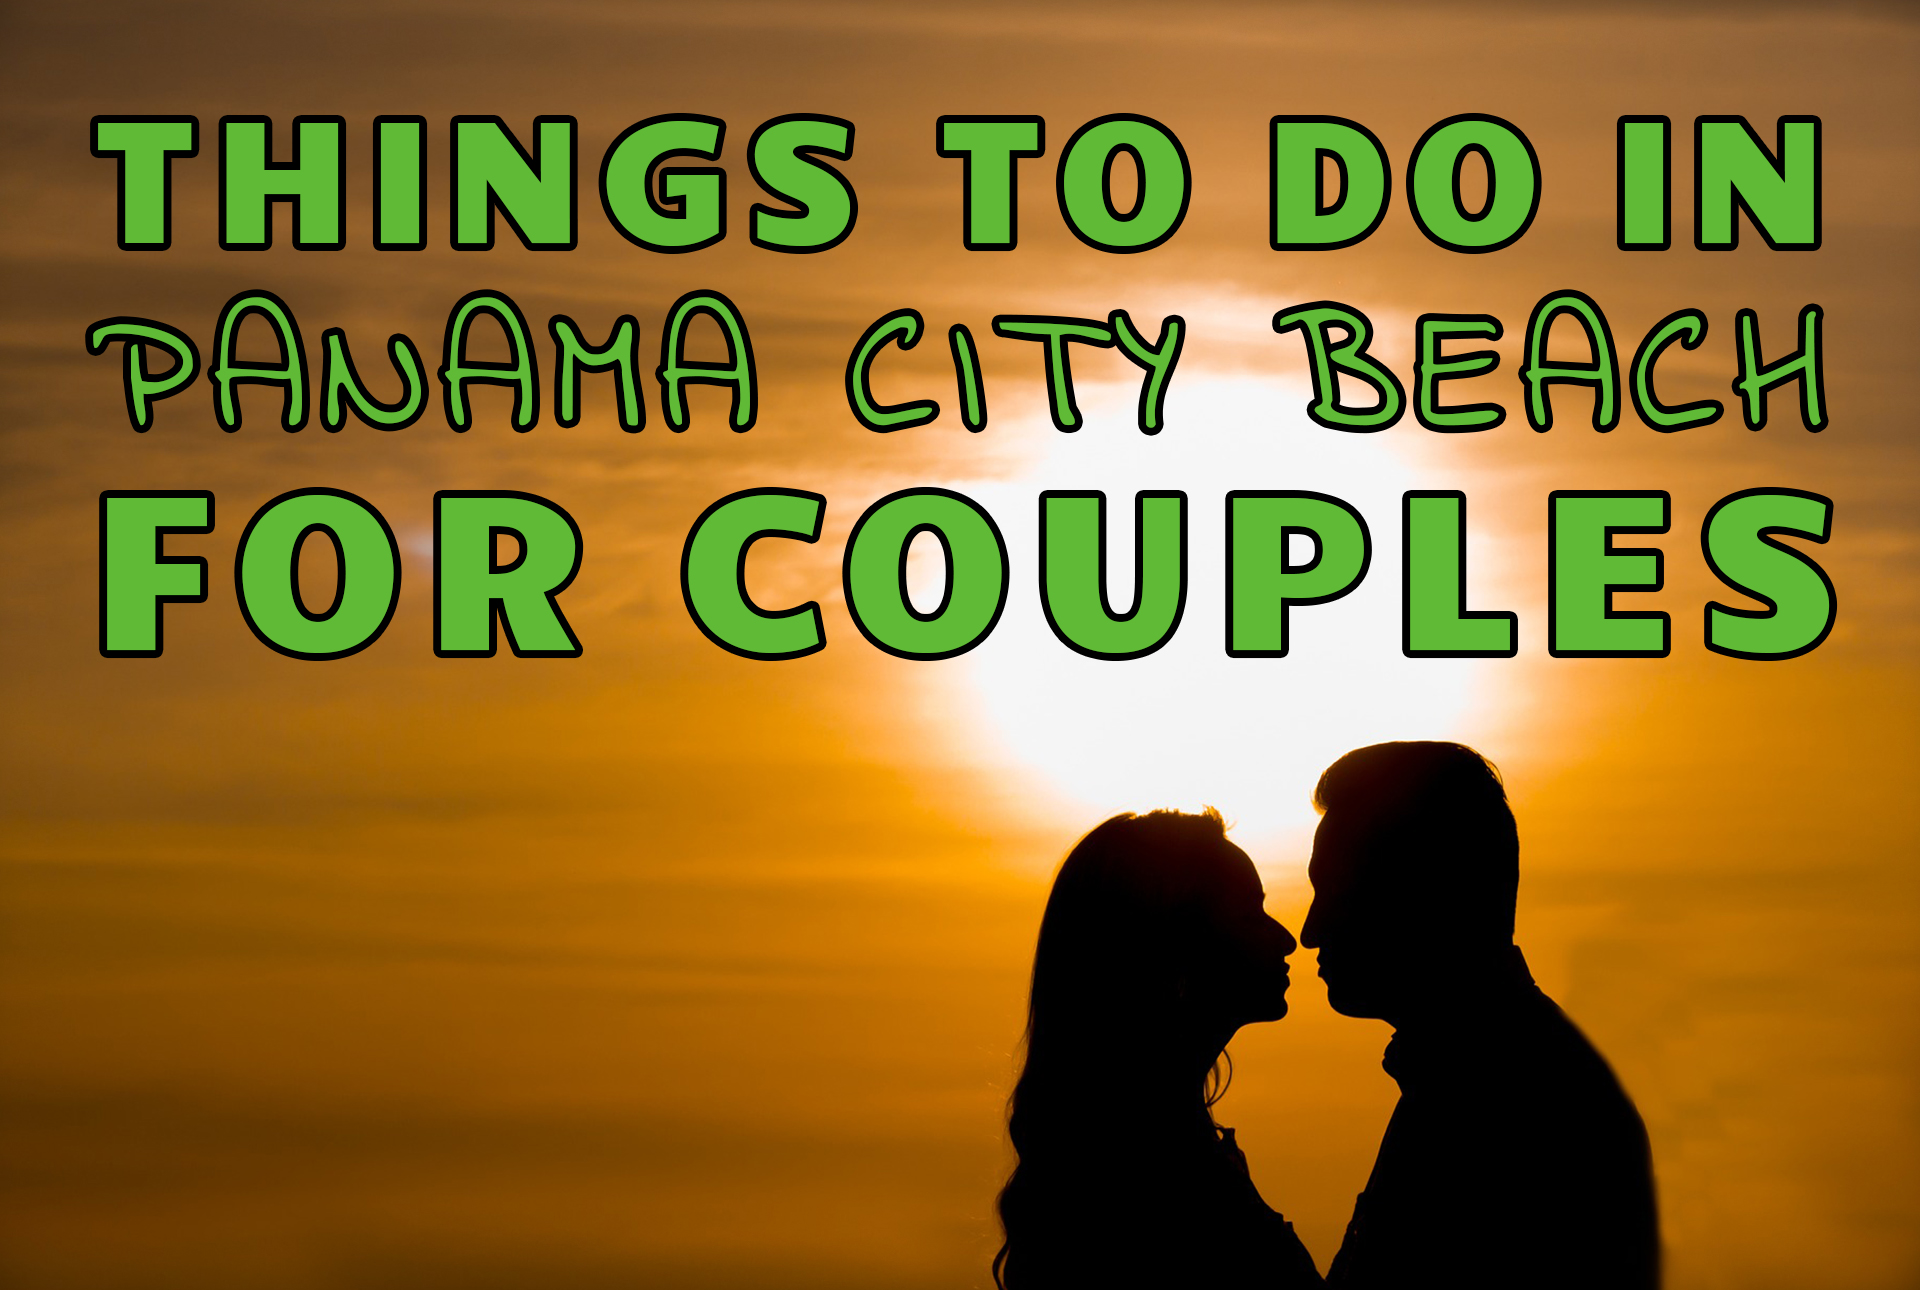 "Things to do in Panama City Beach for Couples" over a couple's silhouette in front of a sun